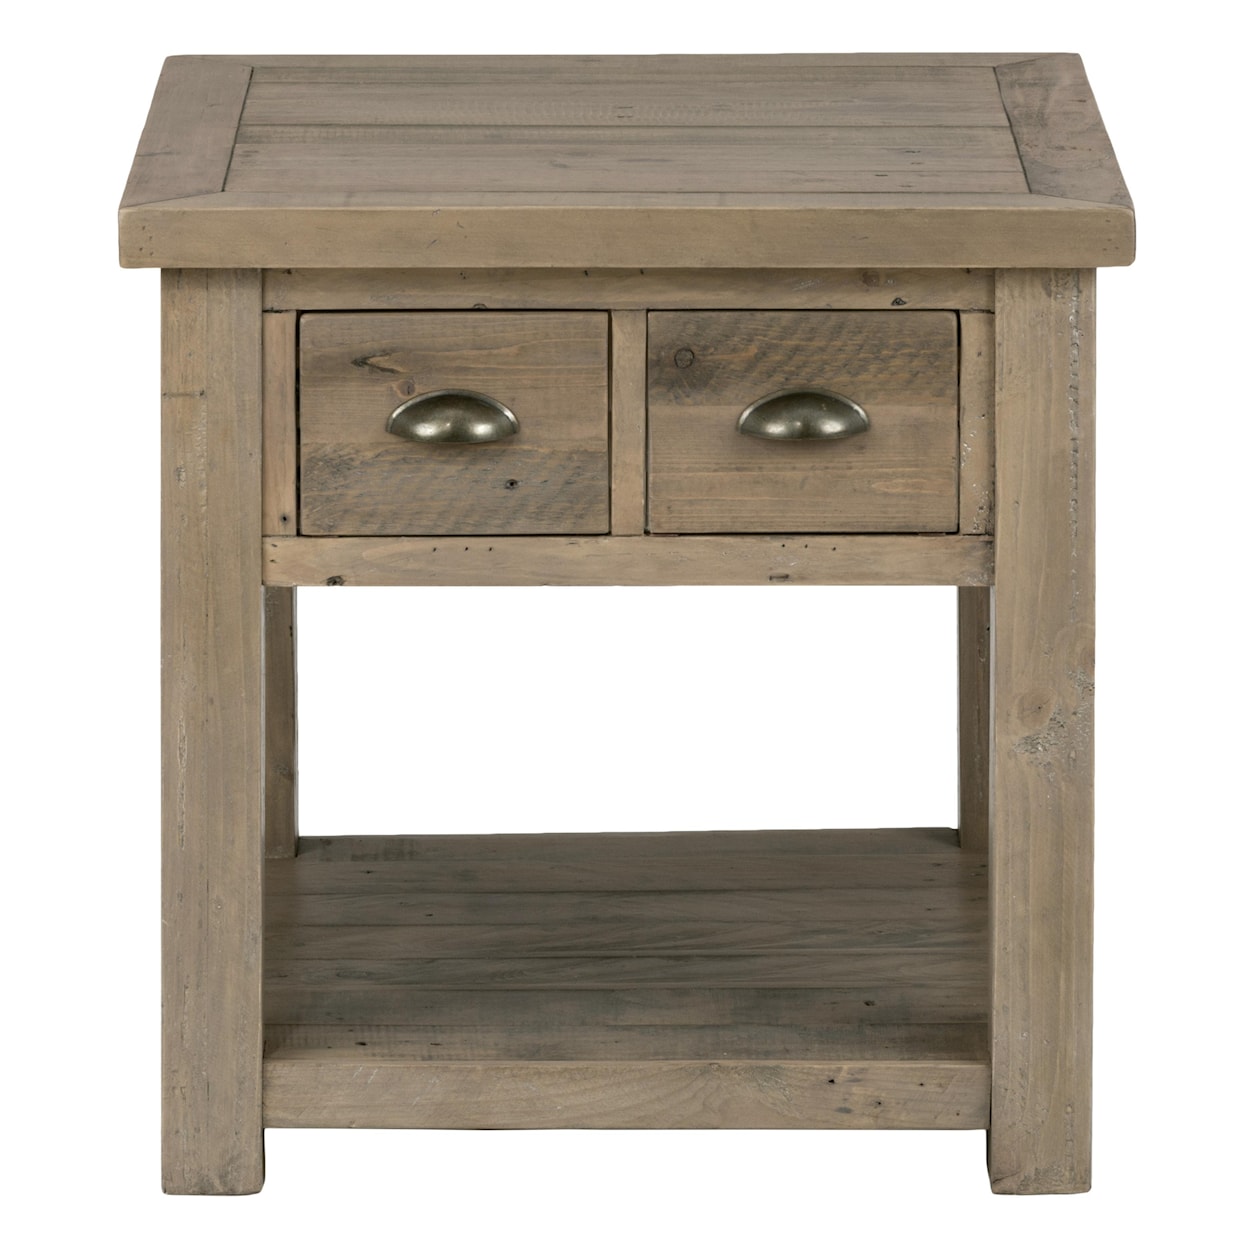 Jofran Slater Mill Pine End Table